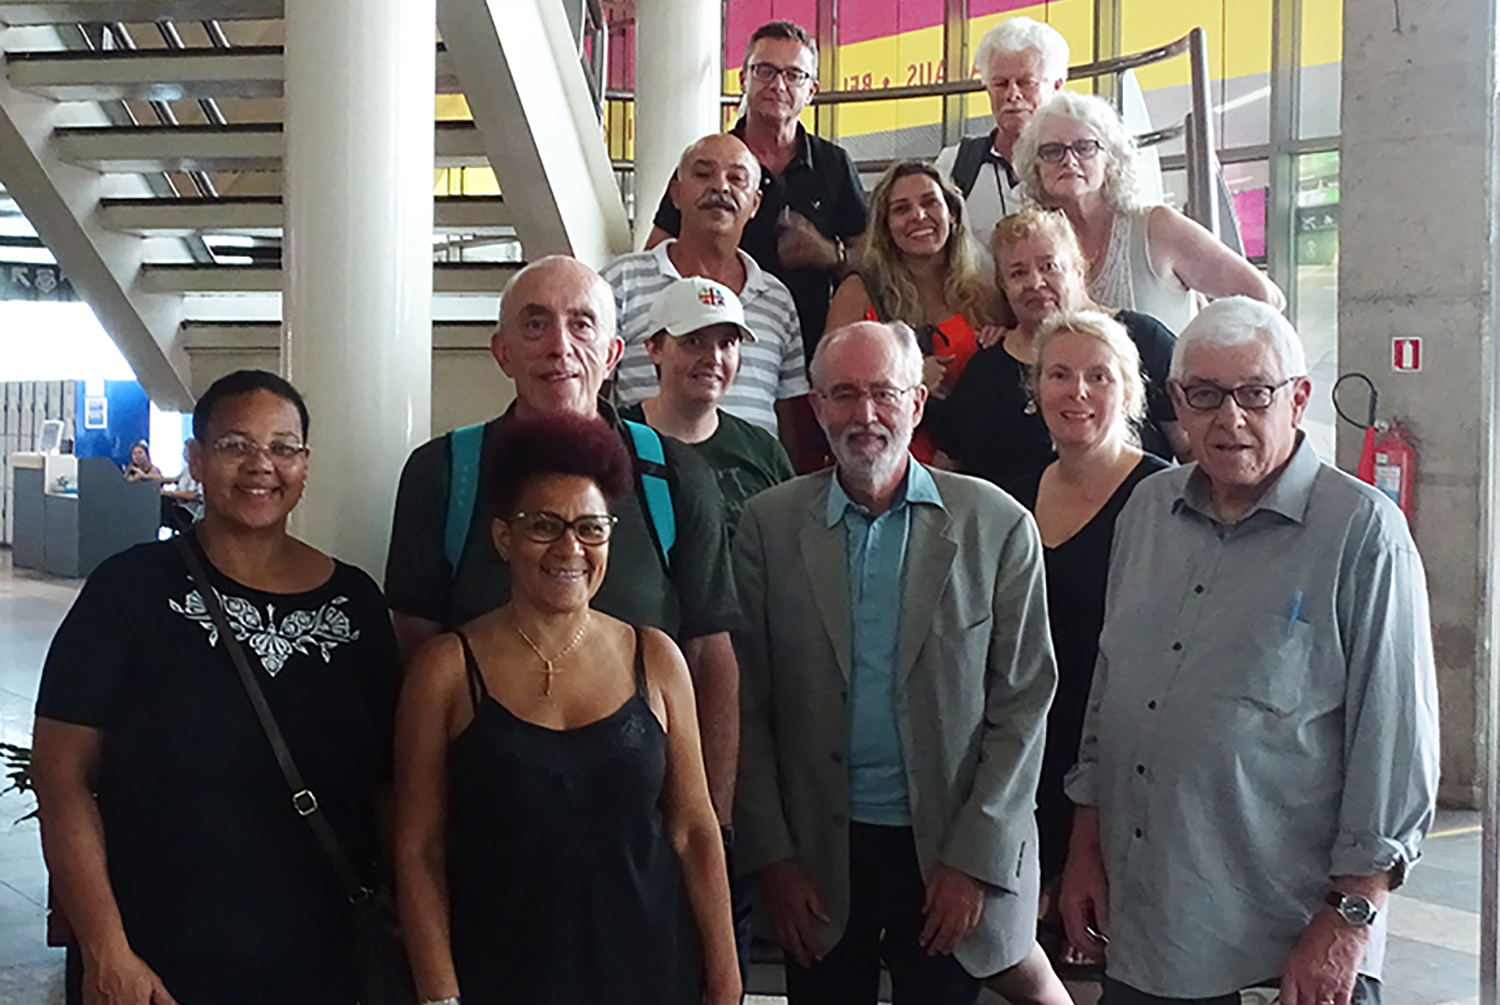 A final group photo at the airport in Belem